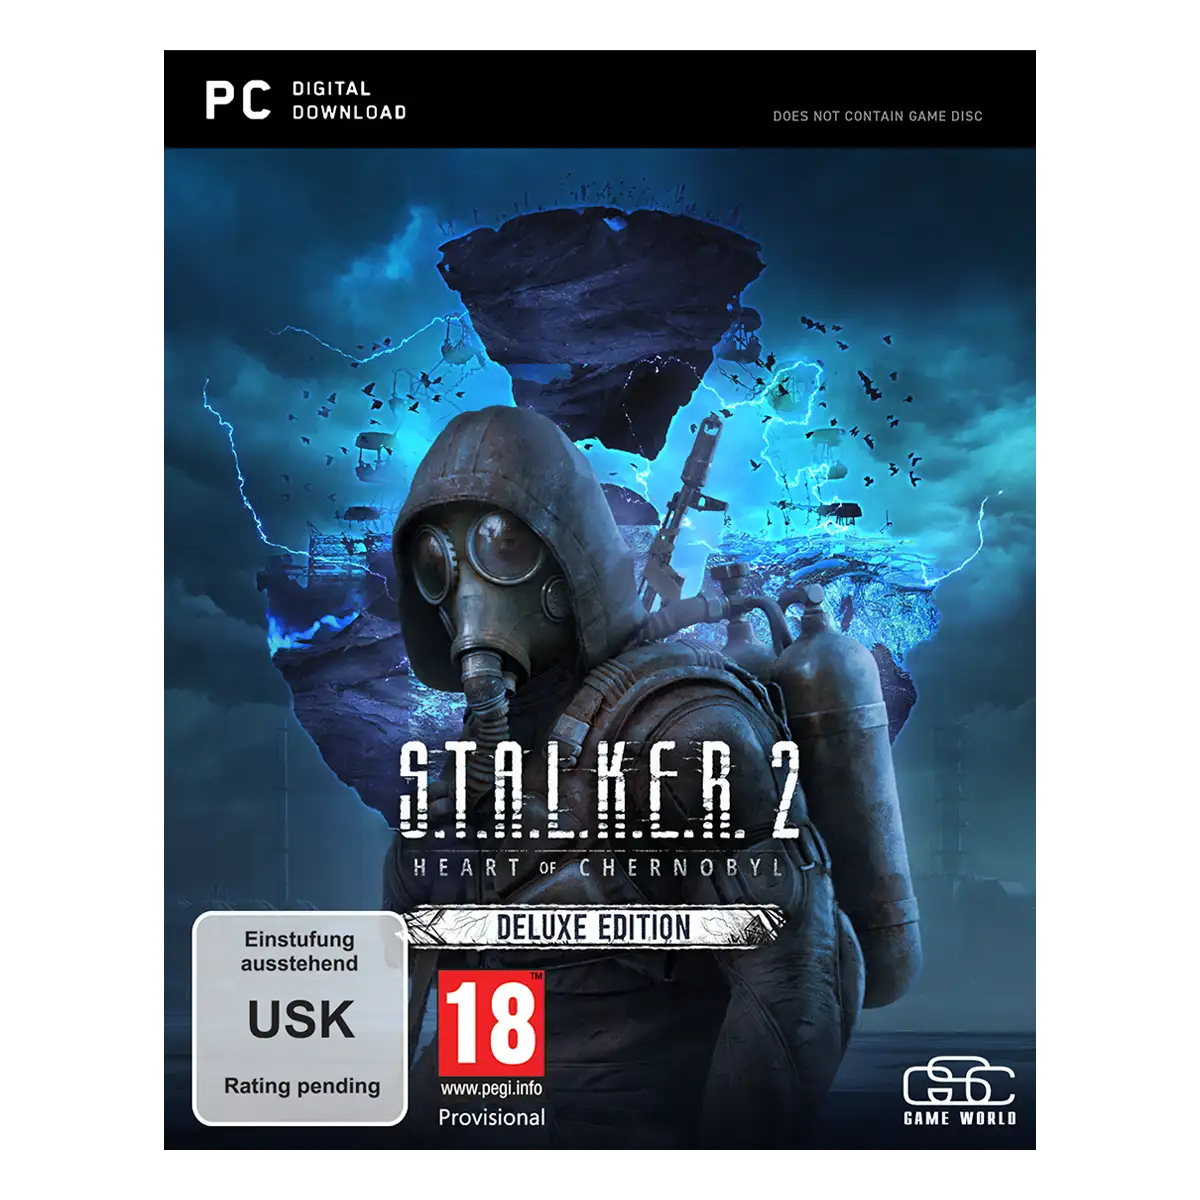 S.T.A.L.K.E.R. 2: Heart of Chornobyl Collector's Edition (PC) (INT)